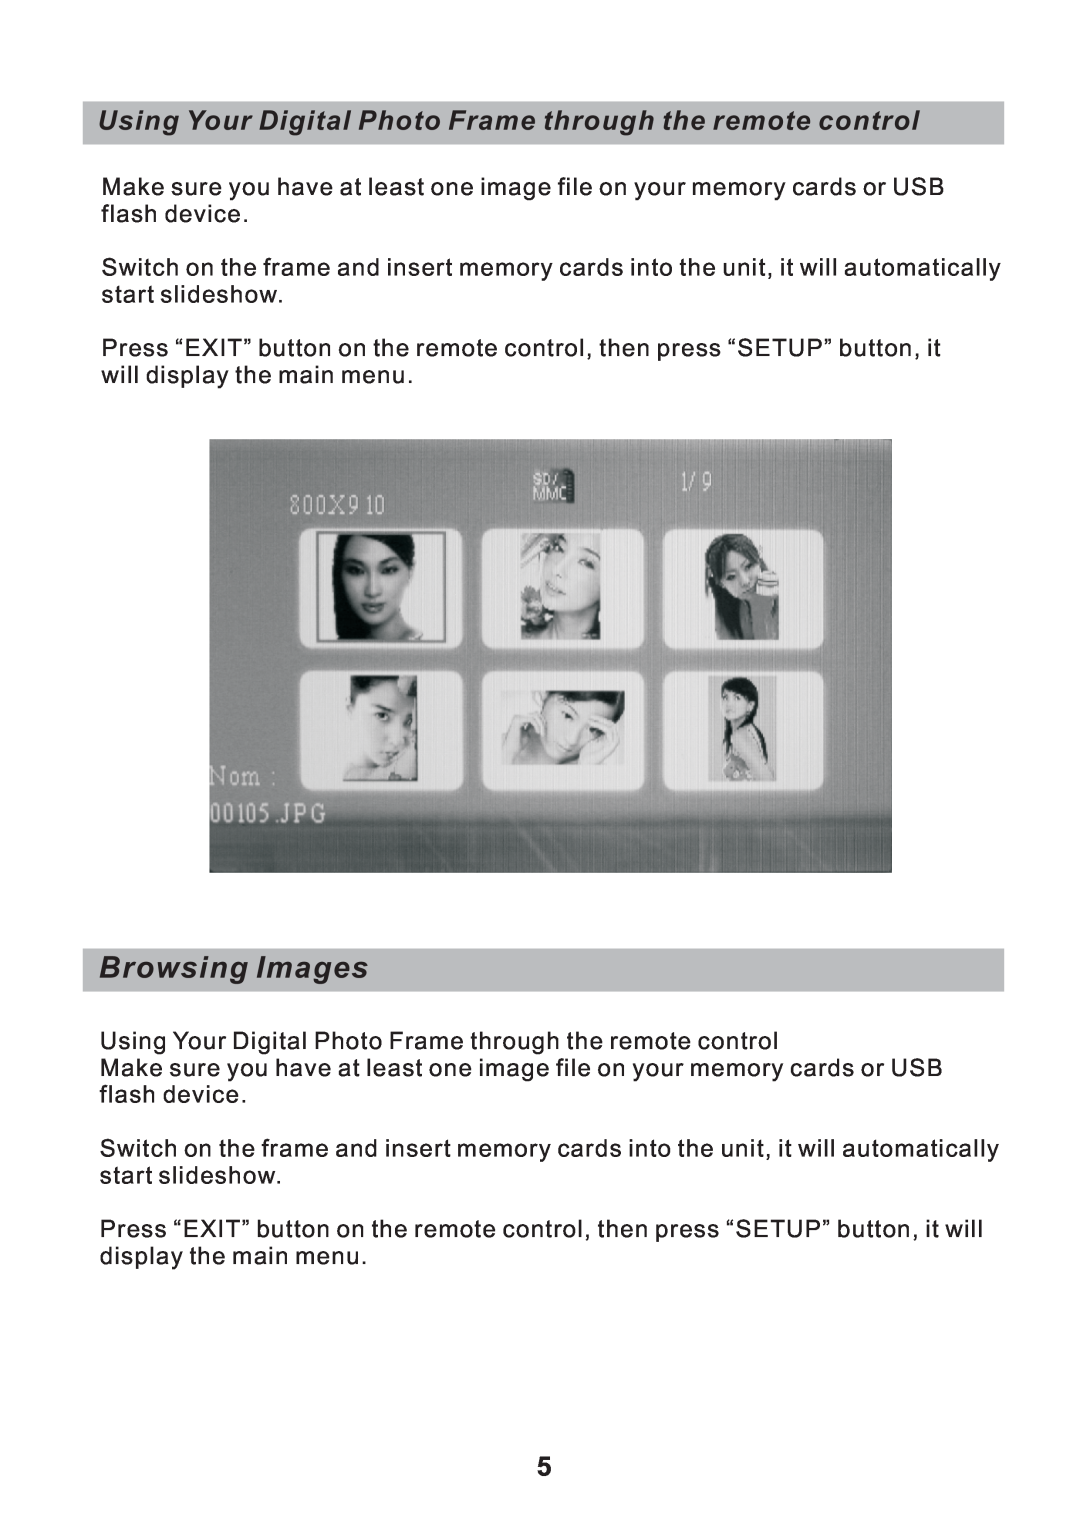 Sylvania SDPF751B user manual Browsing Images, Using Your Digital Photo Frame through the remote control 